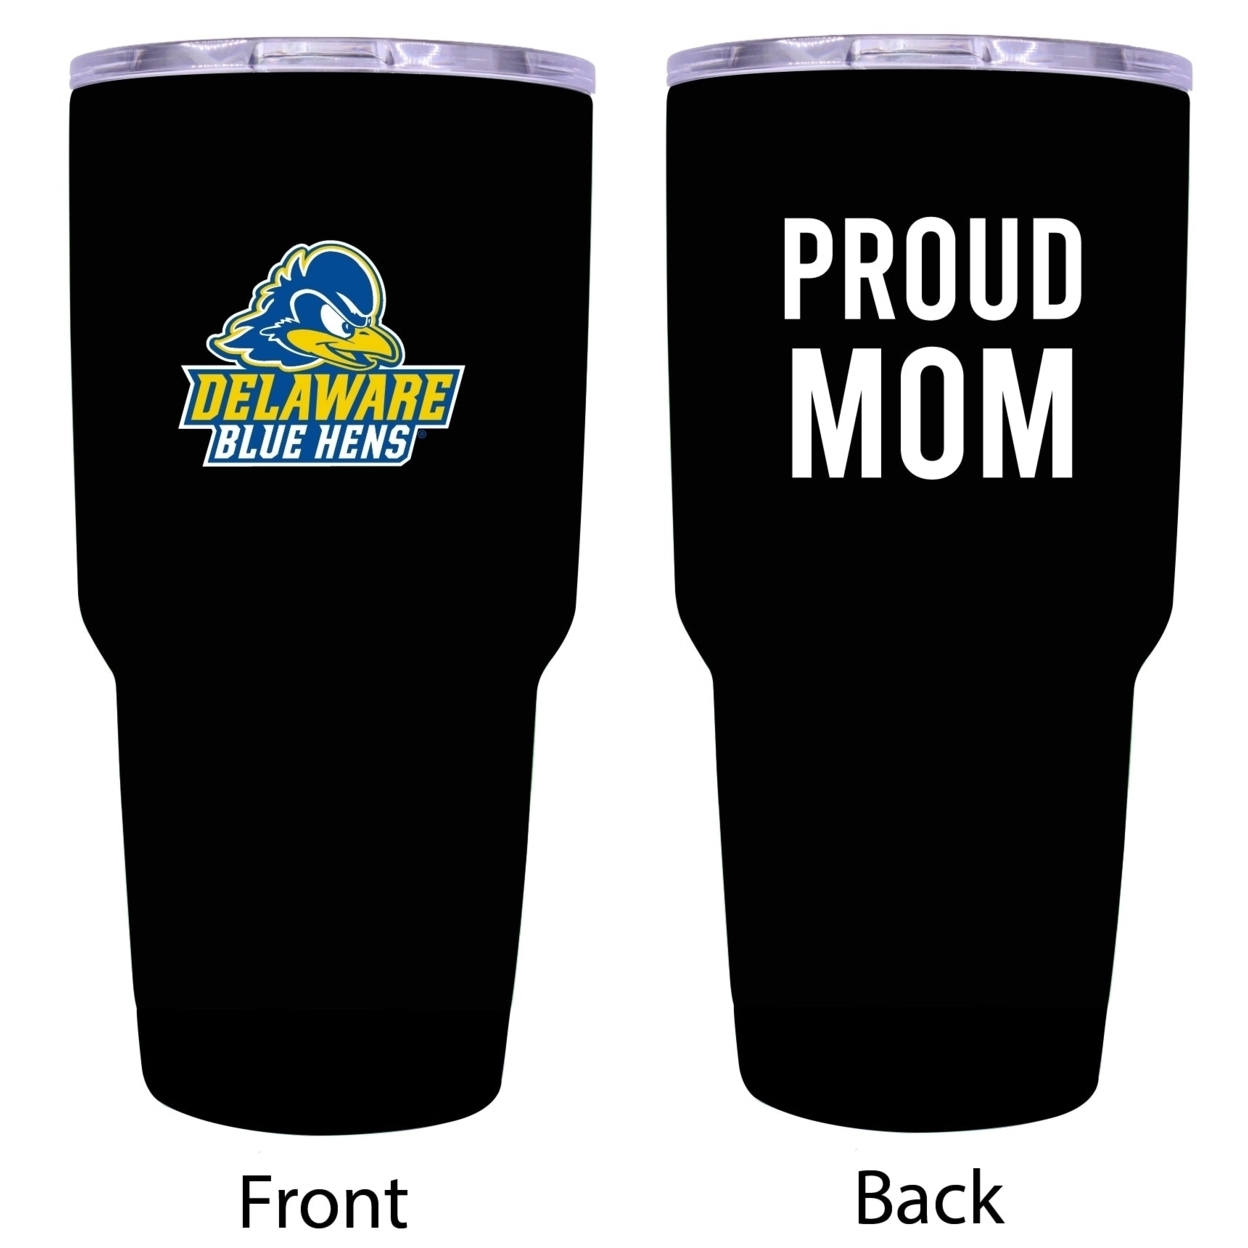 R And R Imports Delaware Blue Hens Proud Mom 24 Oz Insulated Stainless Steel Tumblers Black.